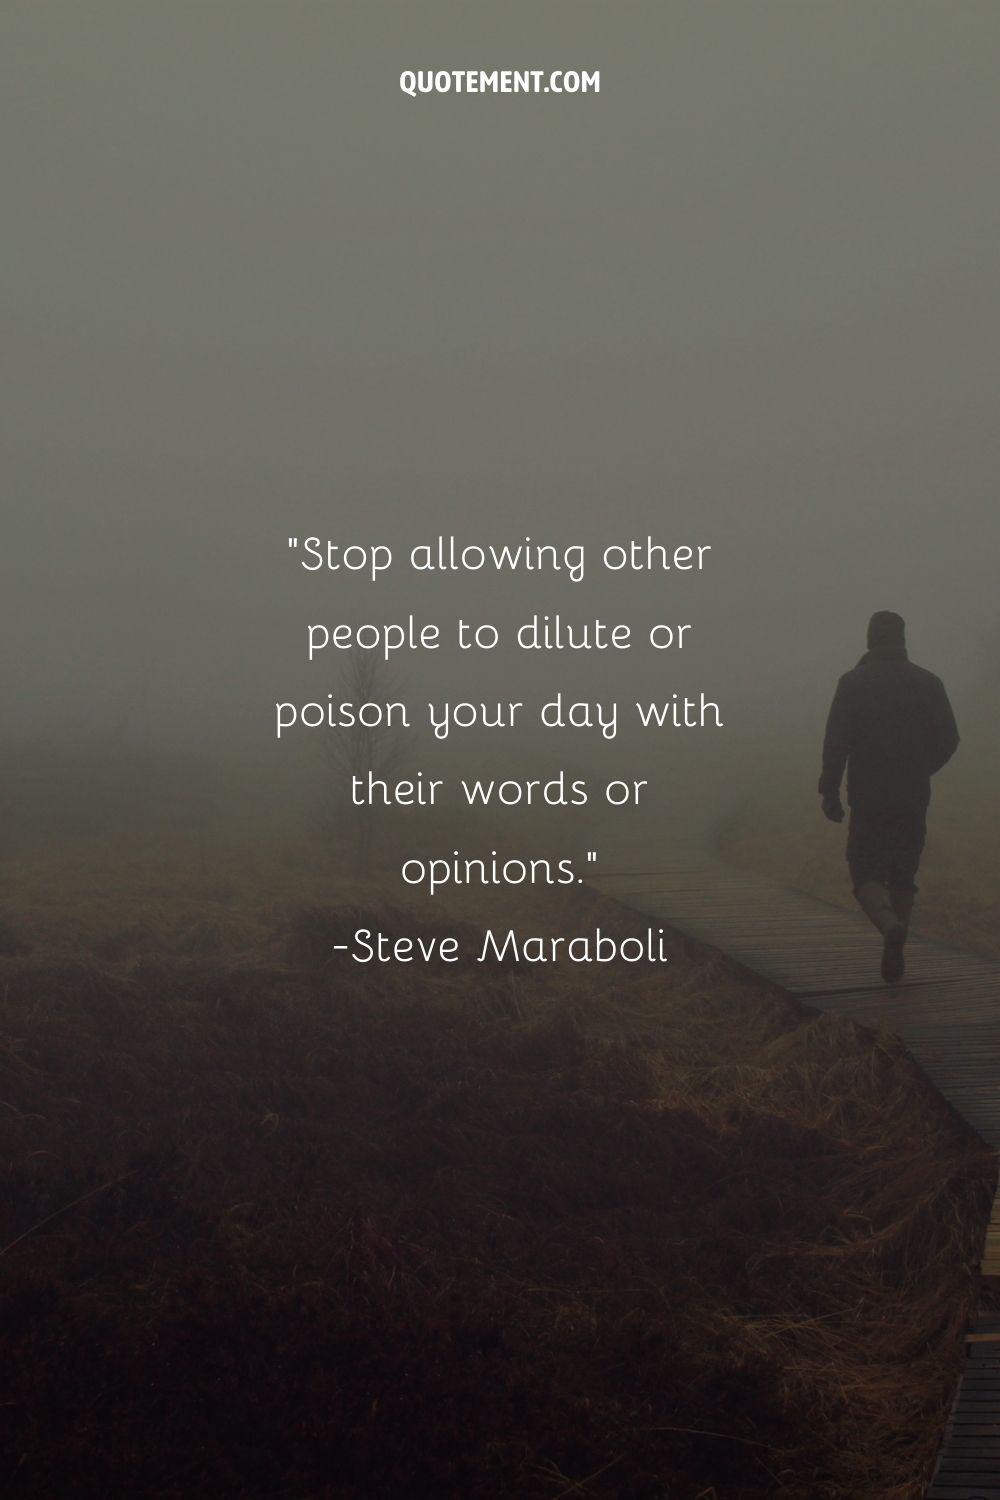 Stop allowing other people to dilute or poison your day with their words or opinions